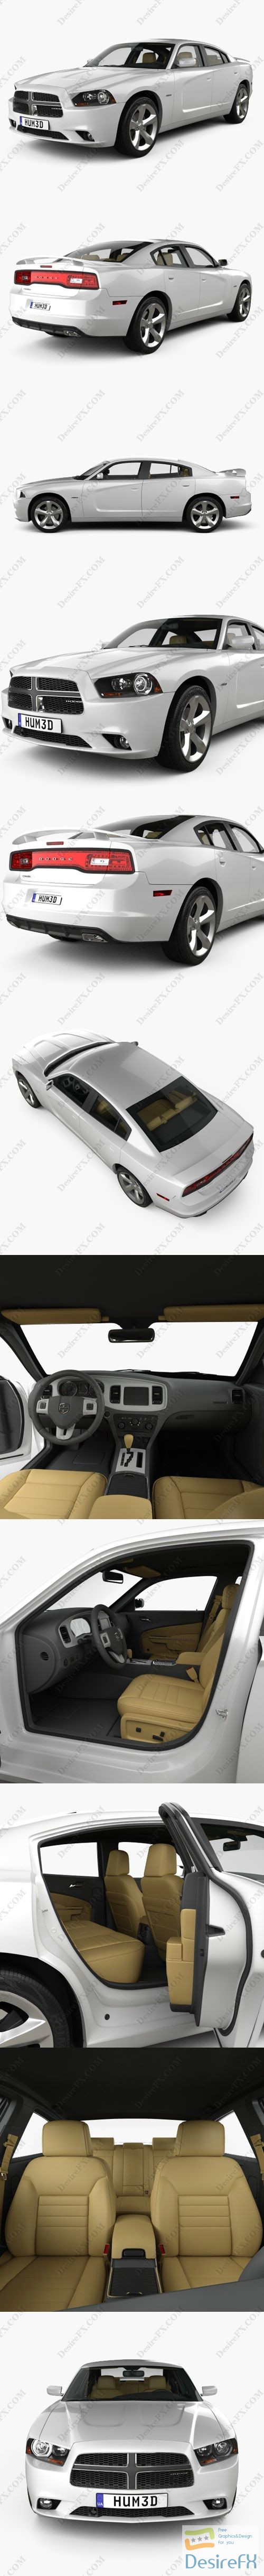 Dodge Charger LX with HQ interior 2011 3D Model